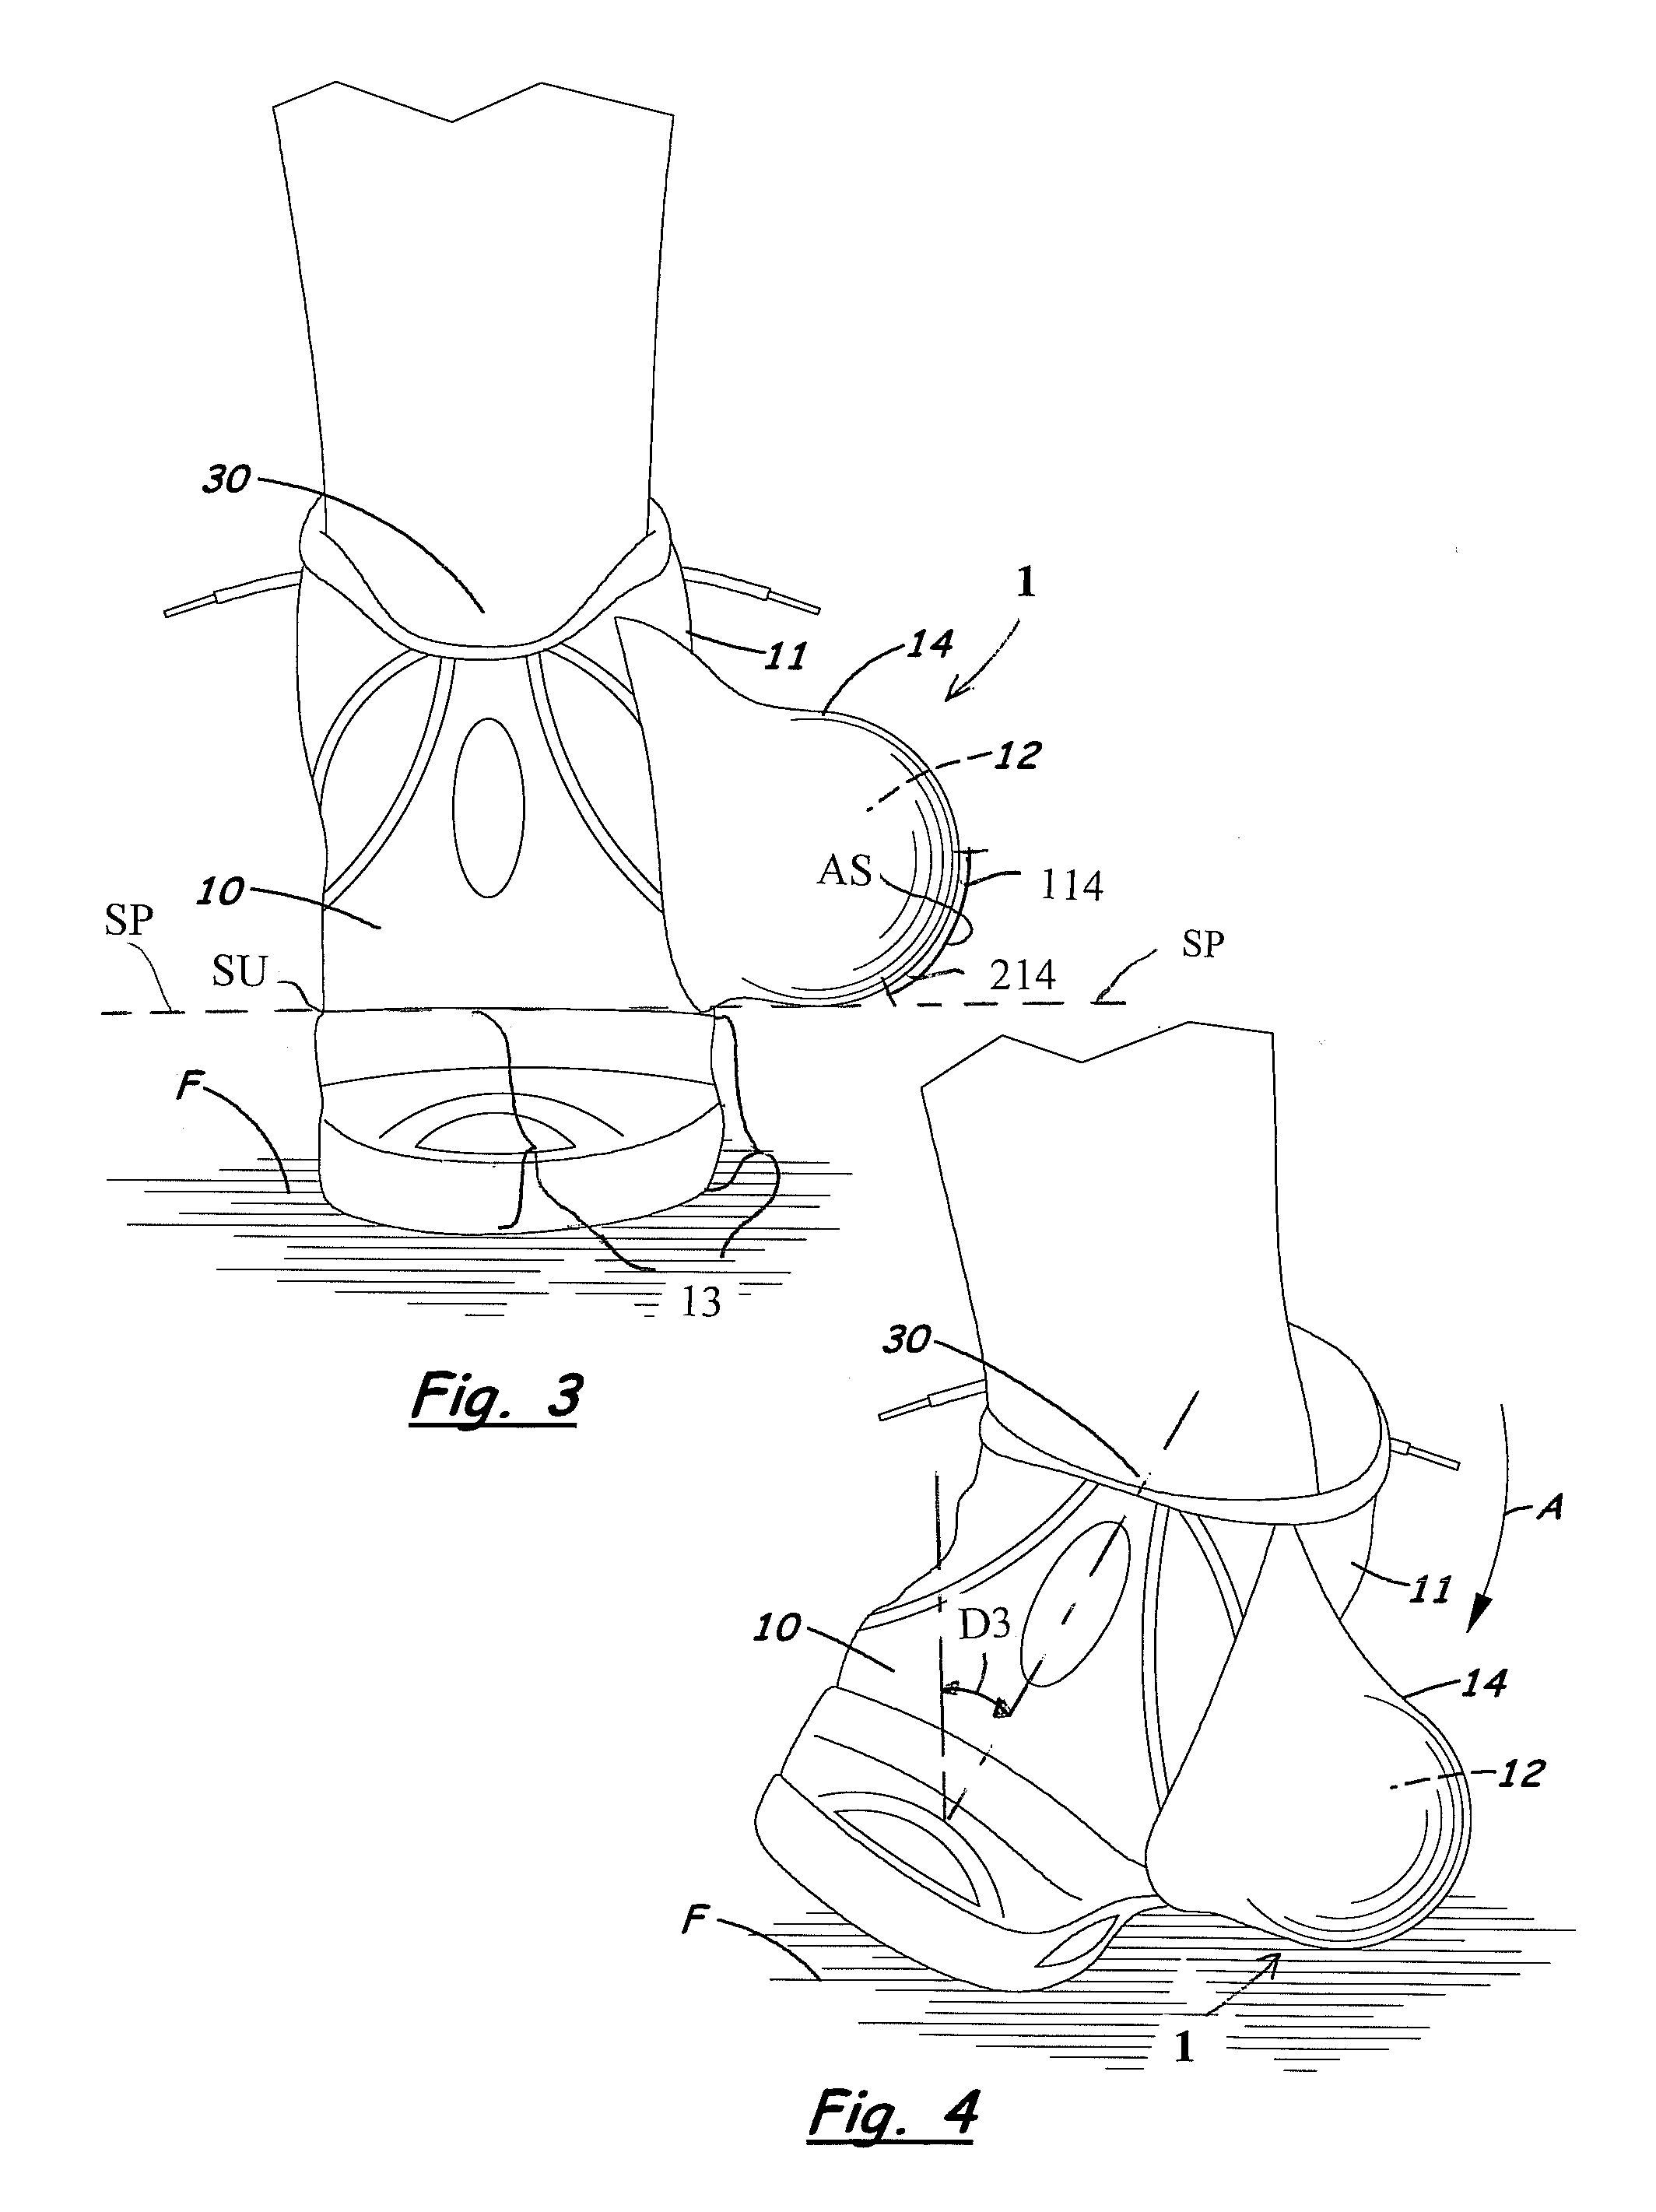 Shoe with system for preventing or limiting ankle sprains